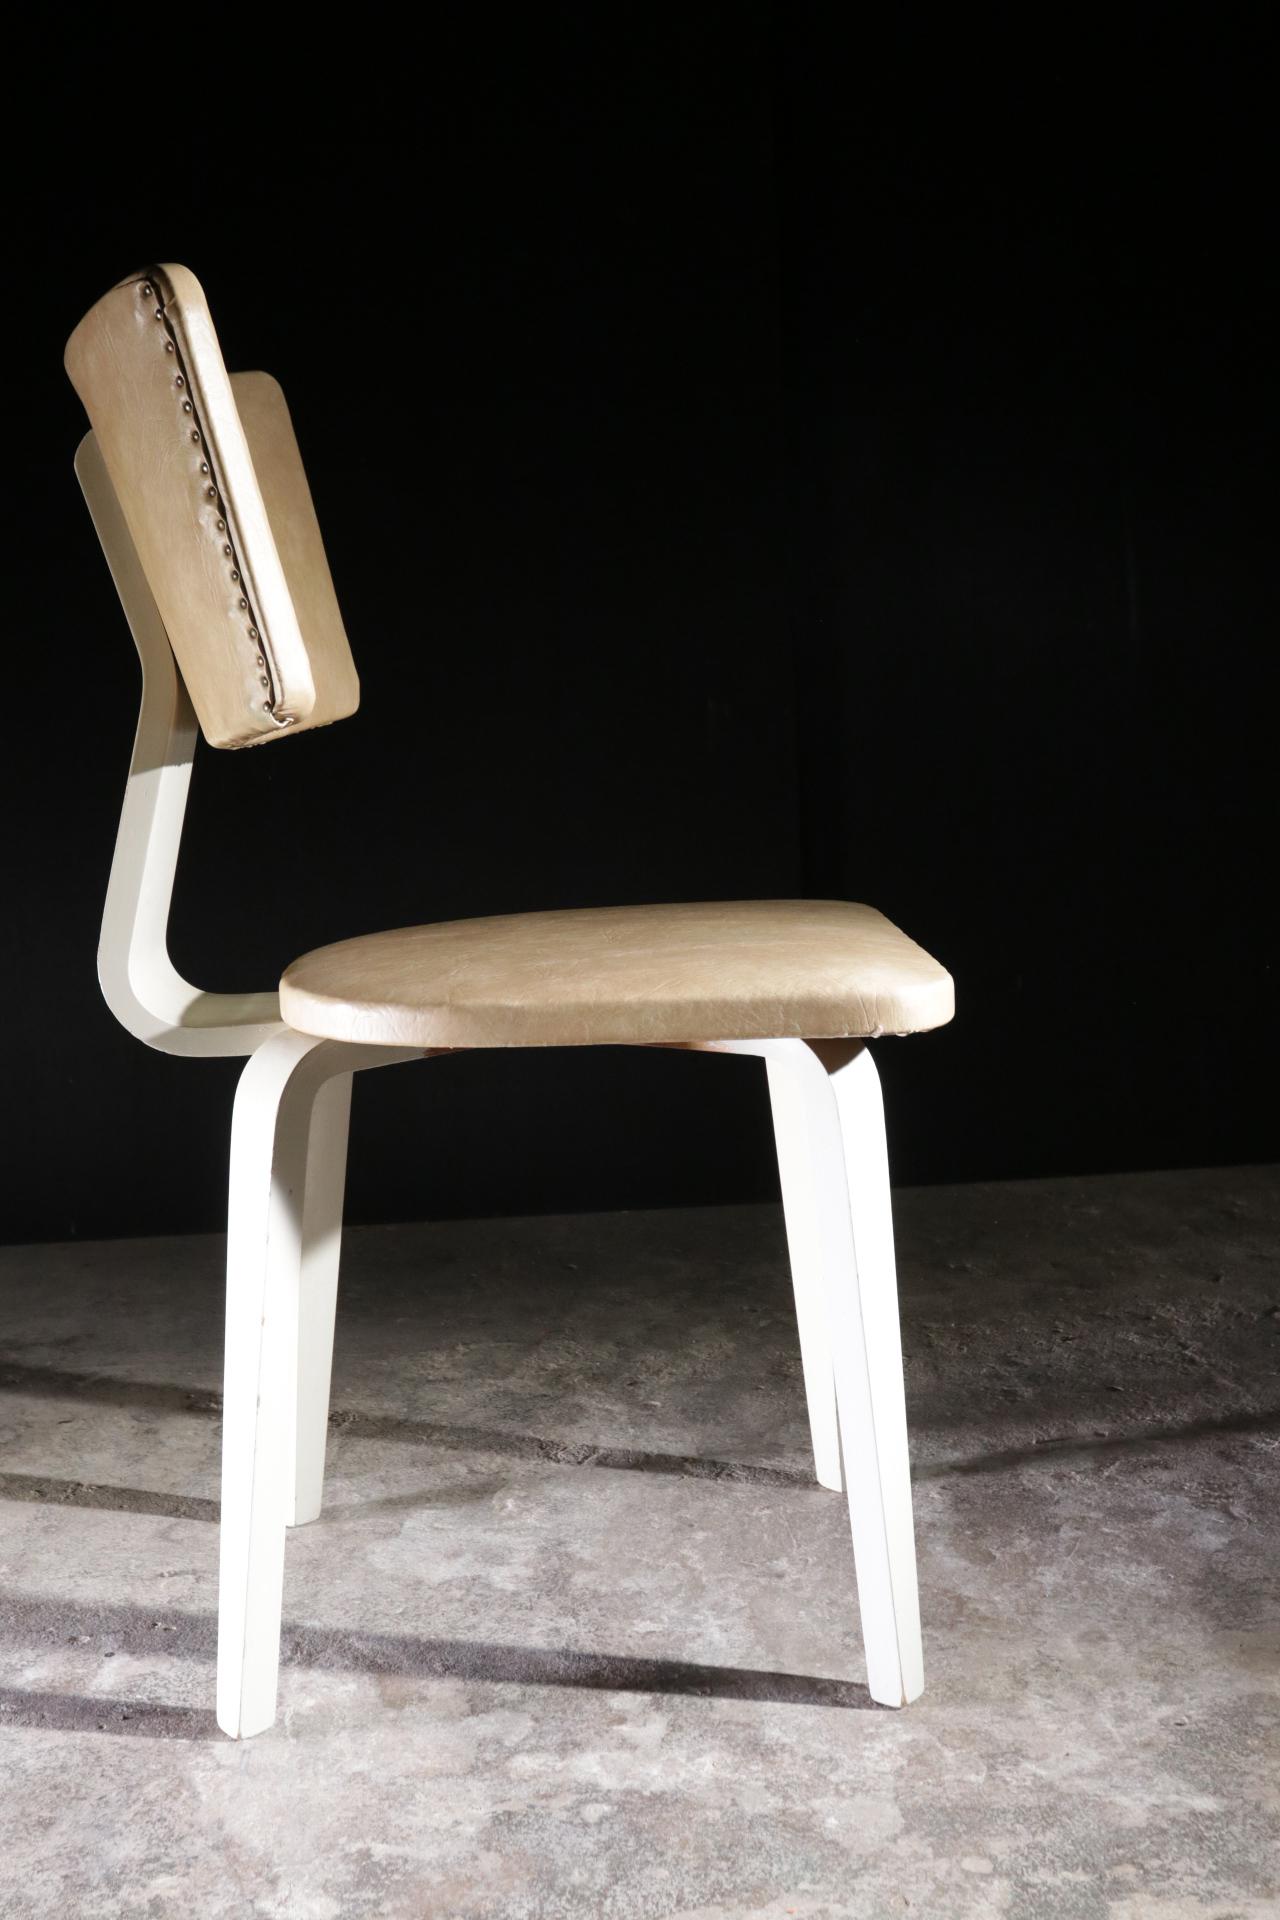 Mid-Century Dining Chair by Cor Alons, Gouda Den Boer Gouda, 1949 For Sale 1